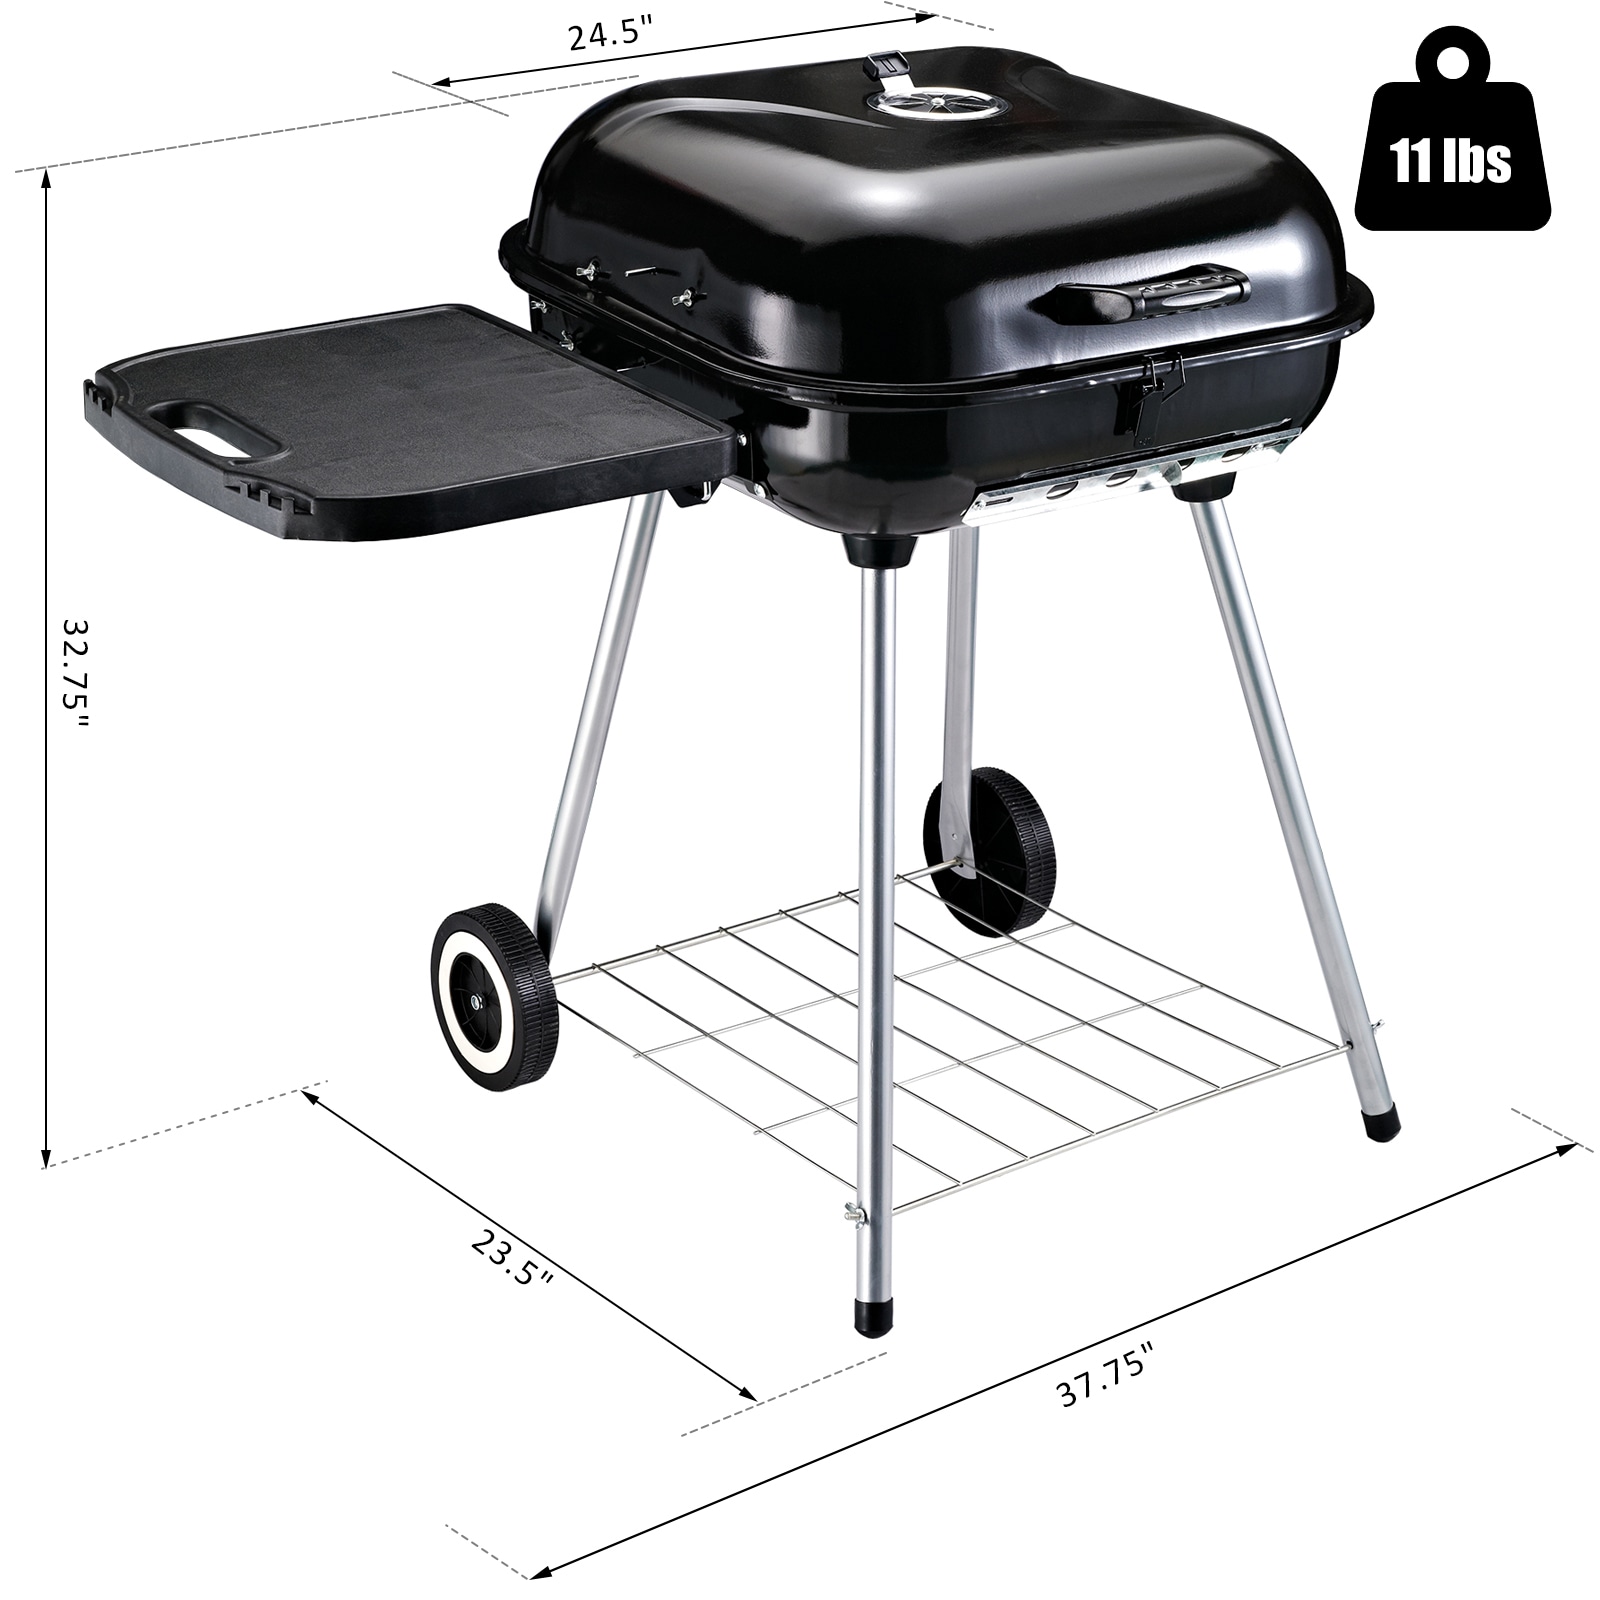 J&V Textiles BBQ Round Grill, 14 inch Portable Charcoal Grill, Lightweight Grill for Barbecue Party, Dual Vents for Temp & Charcoal Control